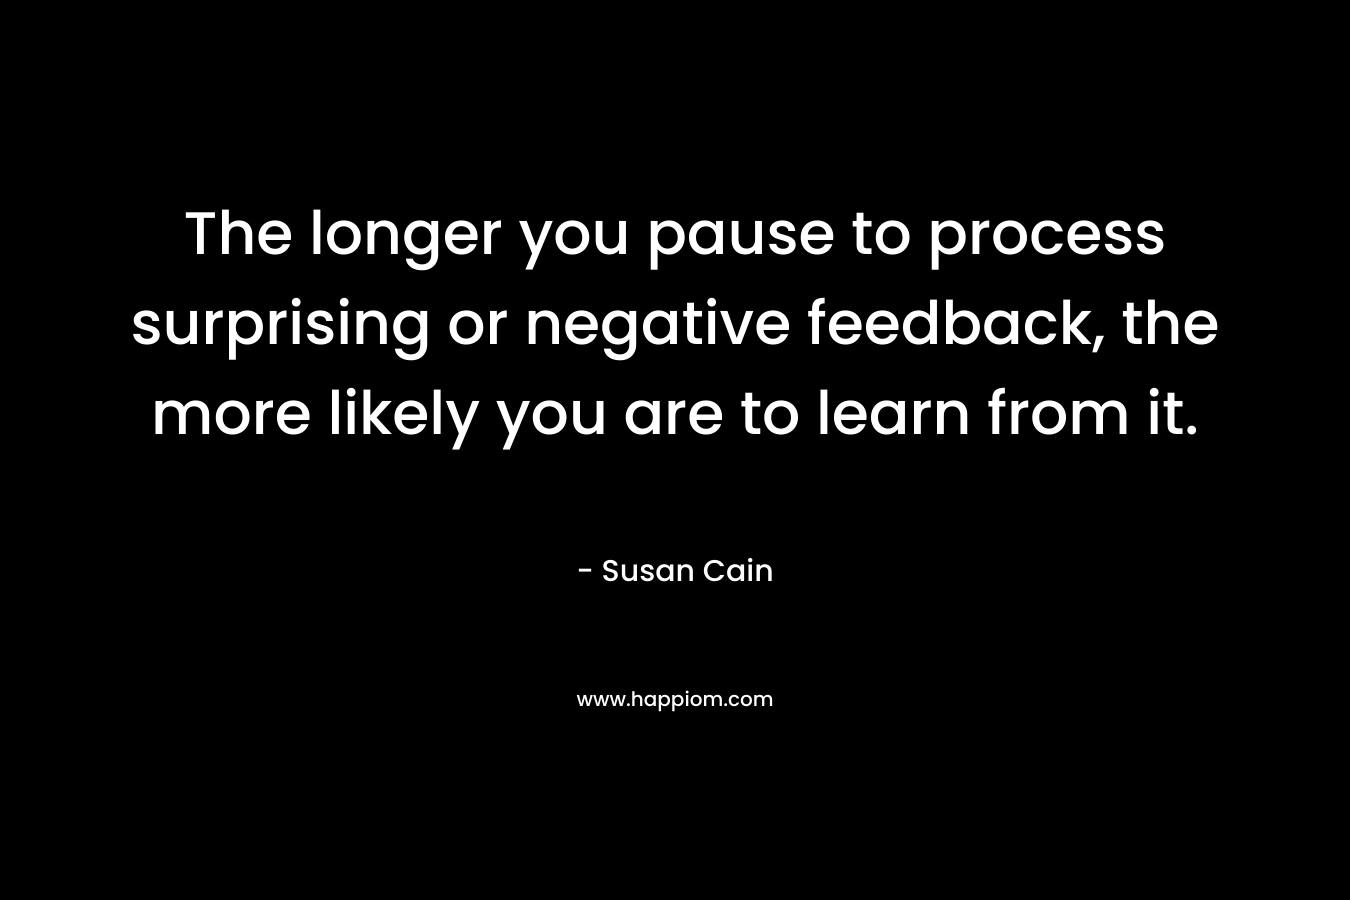 The longer you pause to process surprising or negative feedback, the more likely you are to learn from it. – Susan Cain